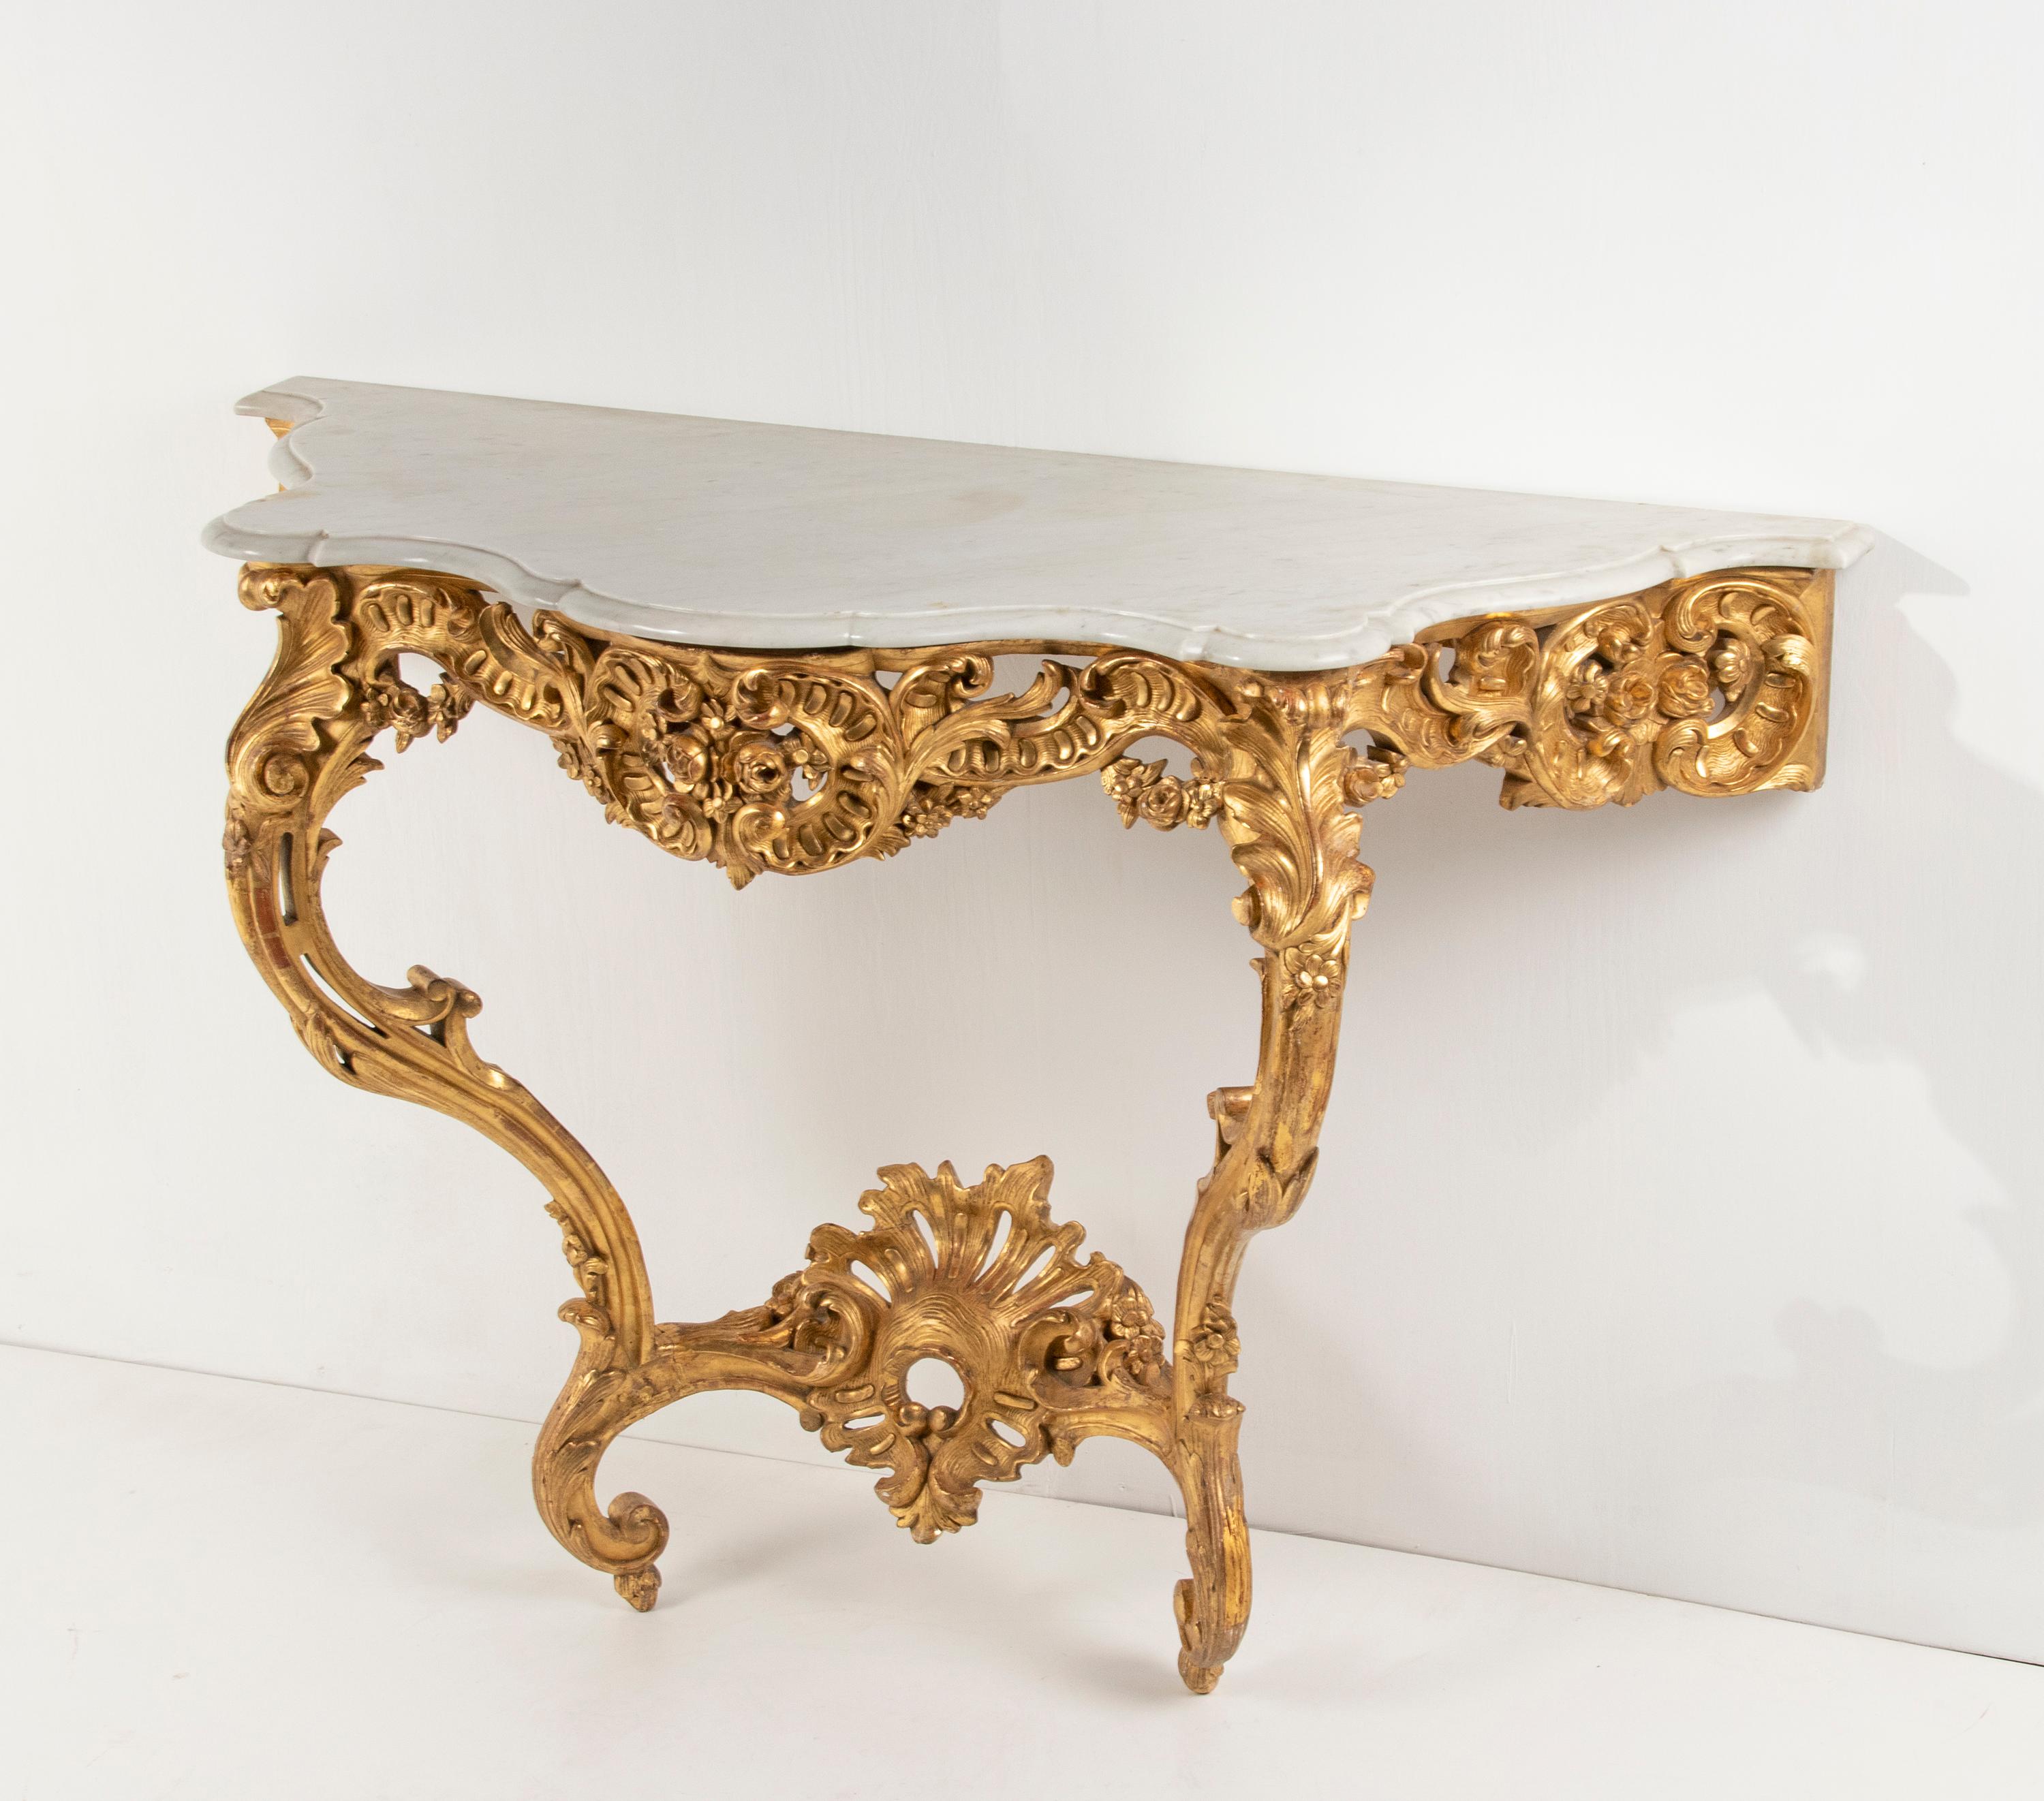 Napoleon III 19th Century French Wooden Carved and Gilded Console Table by Maison Janiaud For Sale